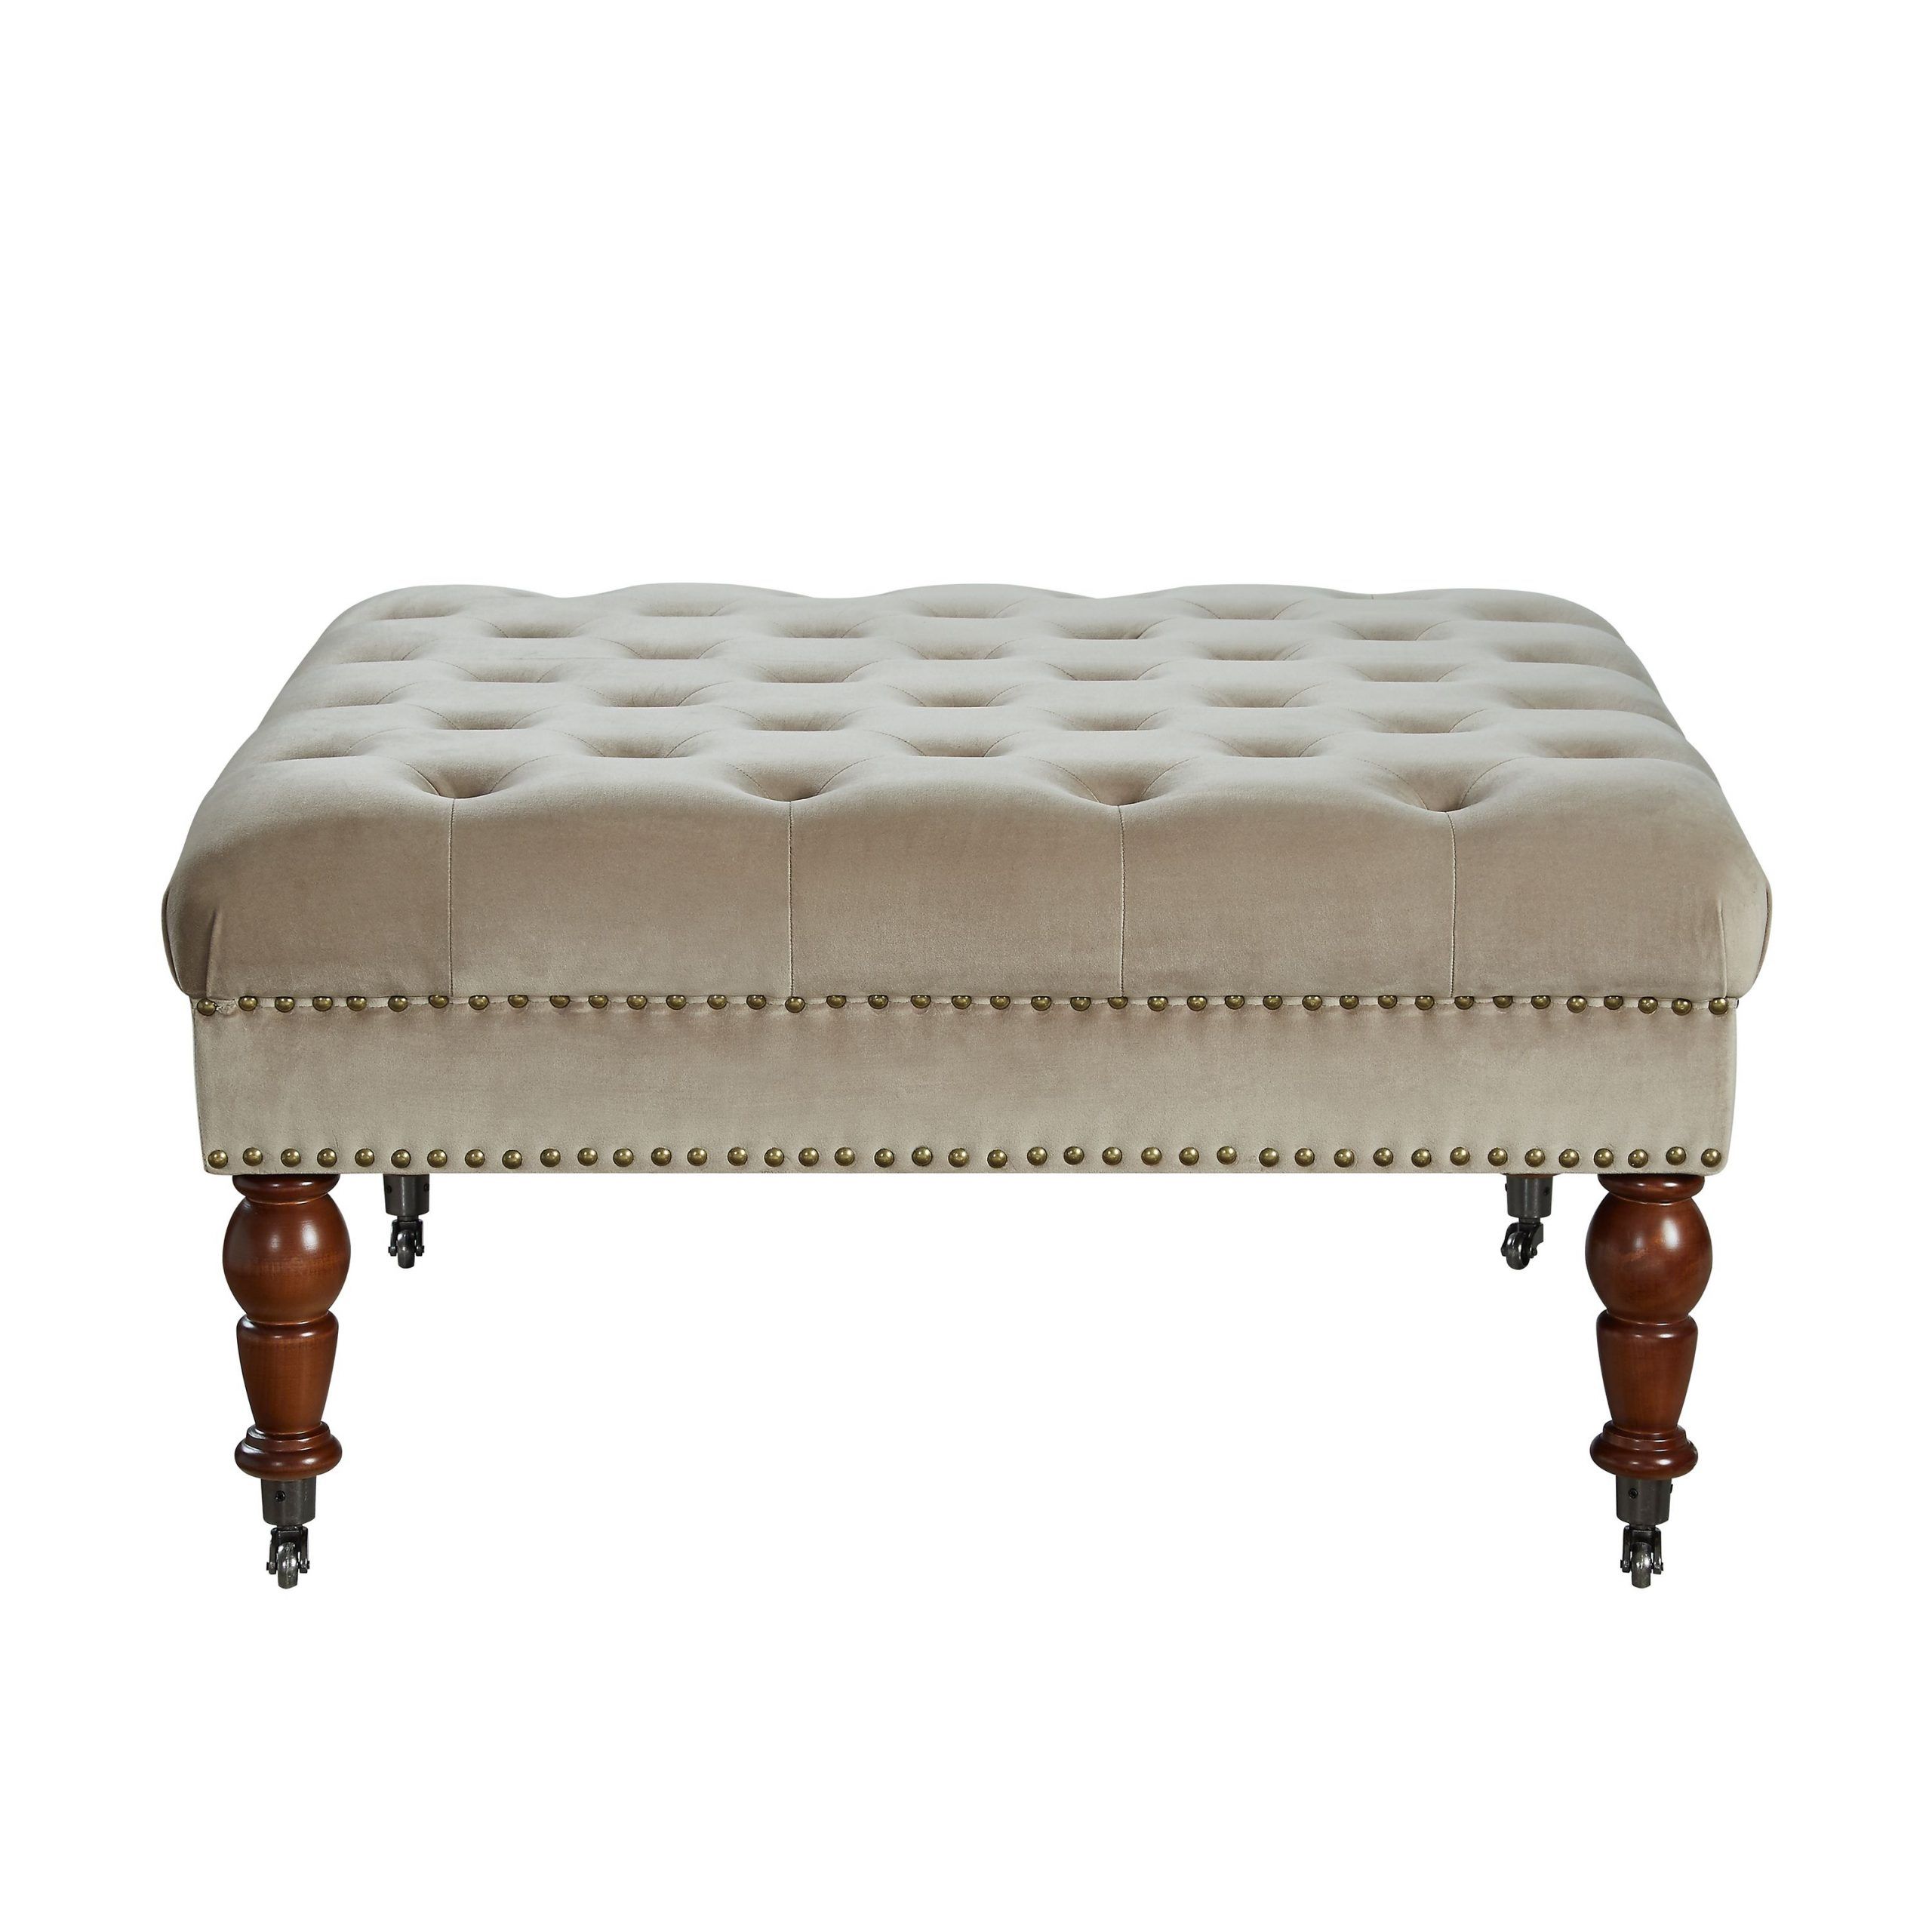 Linon Isabelle Mink Square Tufted Ottoman, Beige & Tan | Tufted Ottoman Inside Caramel Leather And Bronze Steel Tufted Square Ottomans (View 12 of 20)